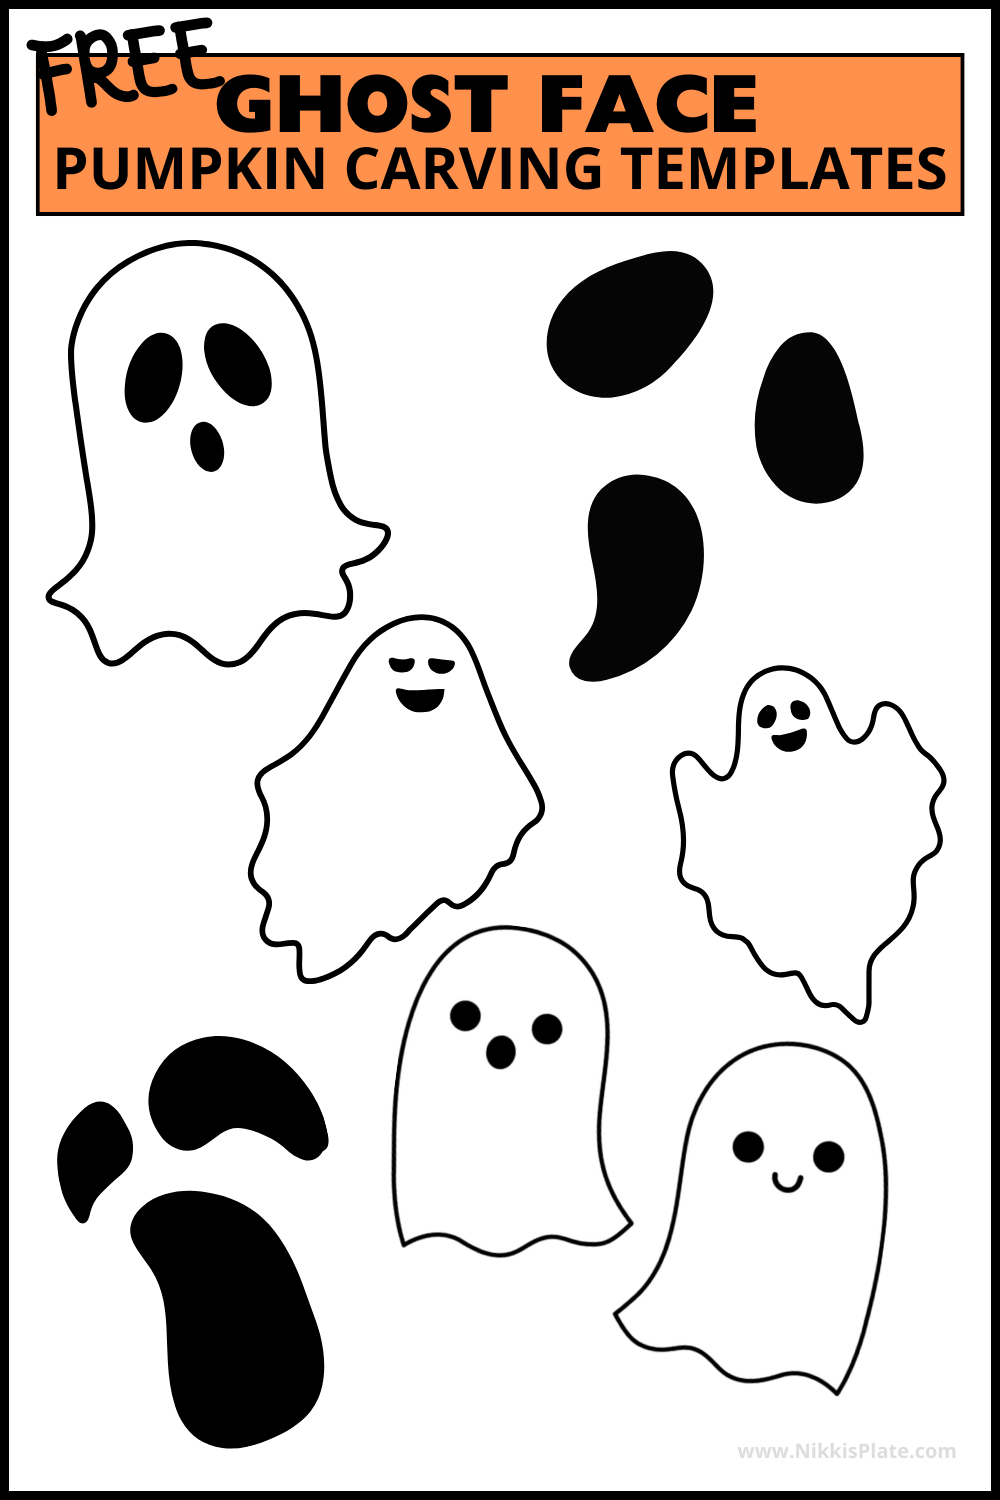 Here are 10 FREE ghost face pumpkin carving templates to elevate your Halloween décor. Print them at home, beginner-friendly, and perfect for a spooktacular pumpkin carving experience.